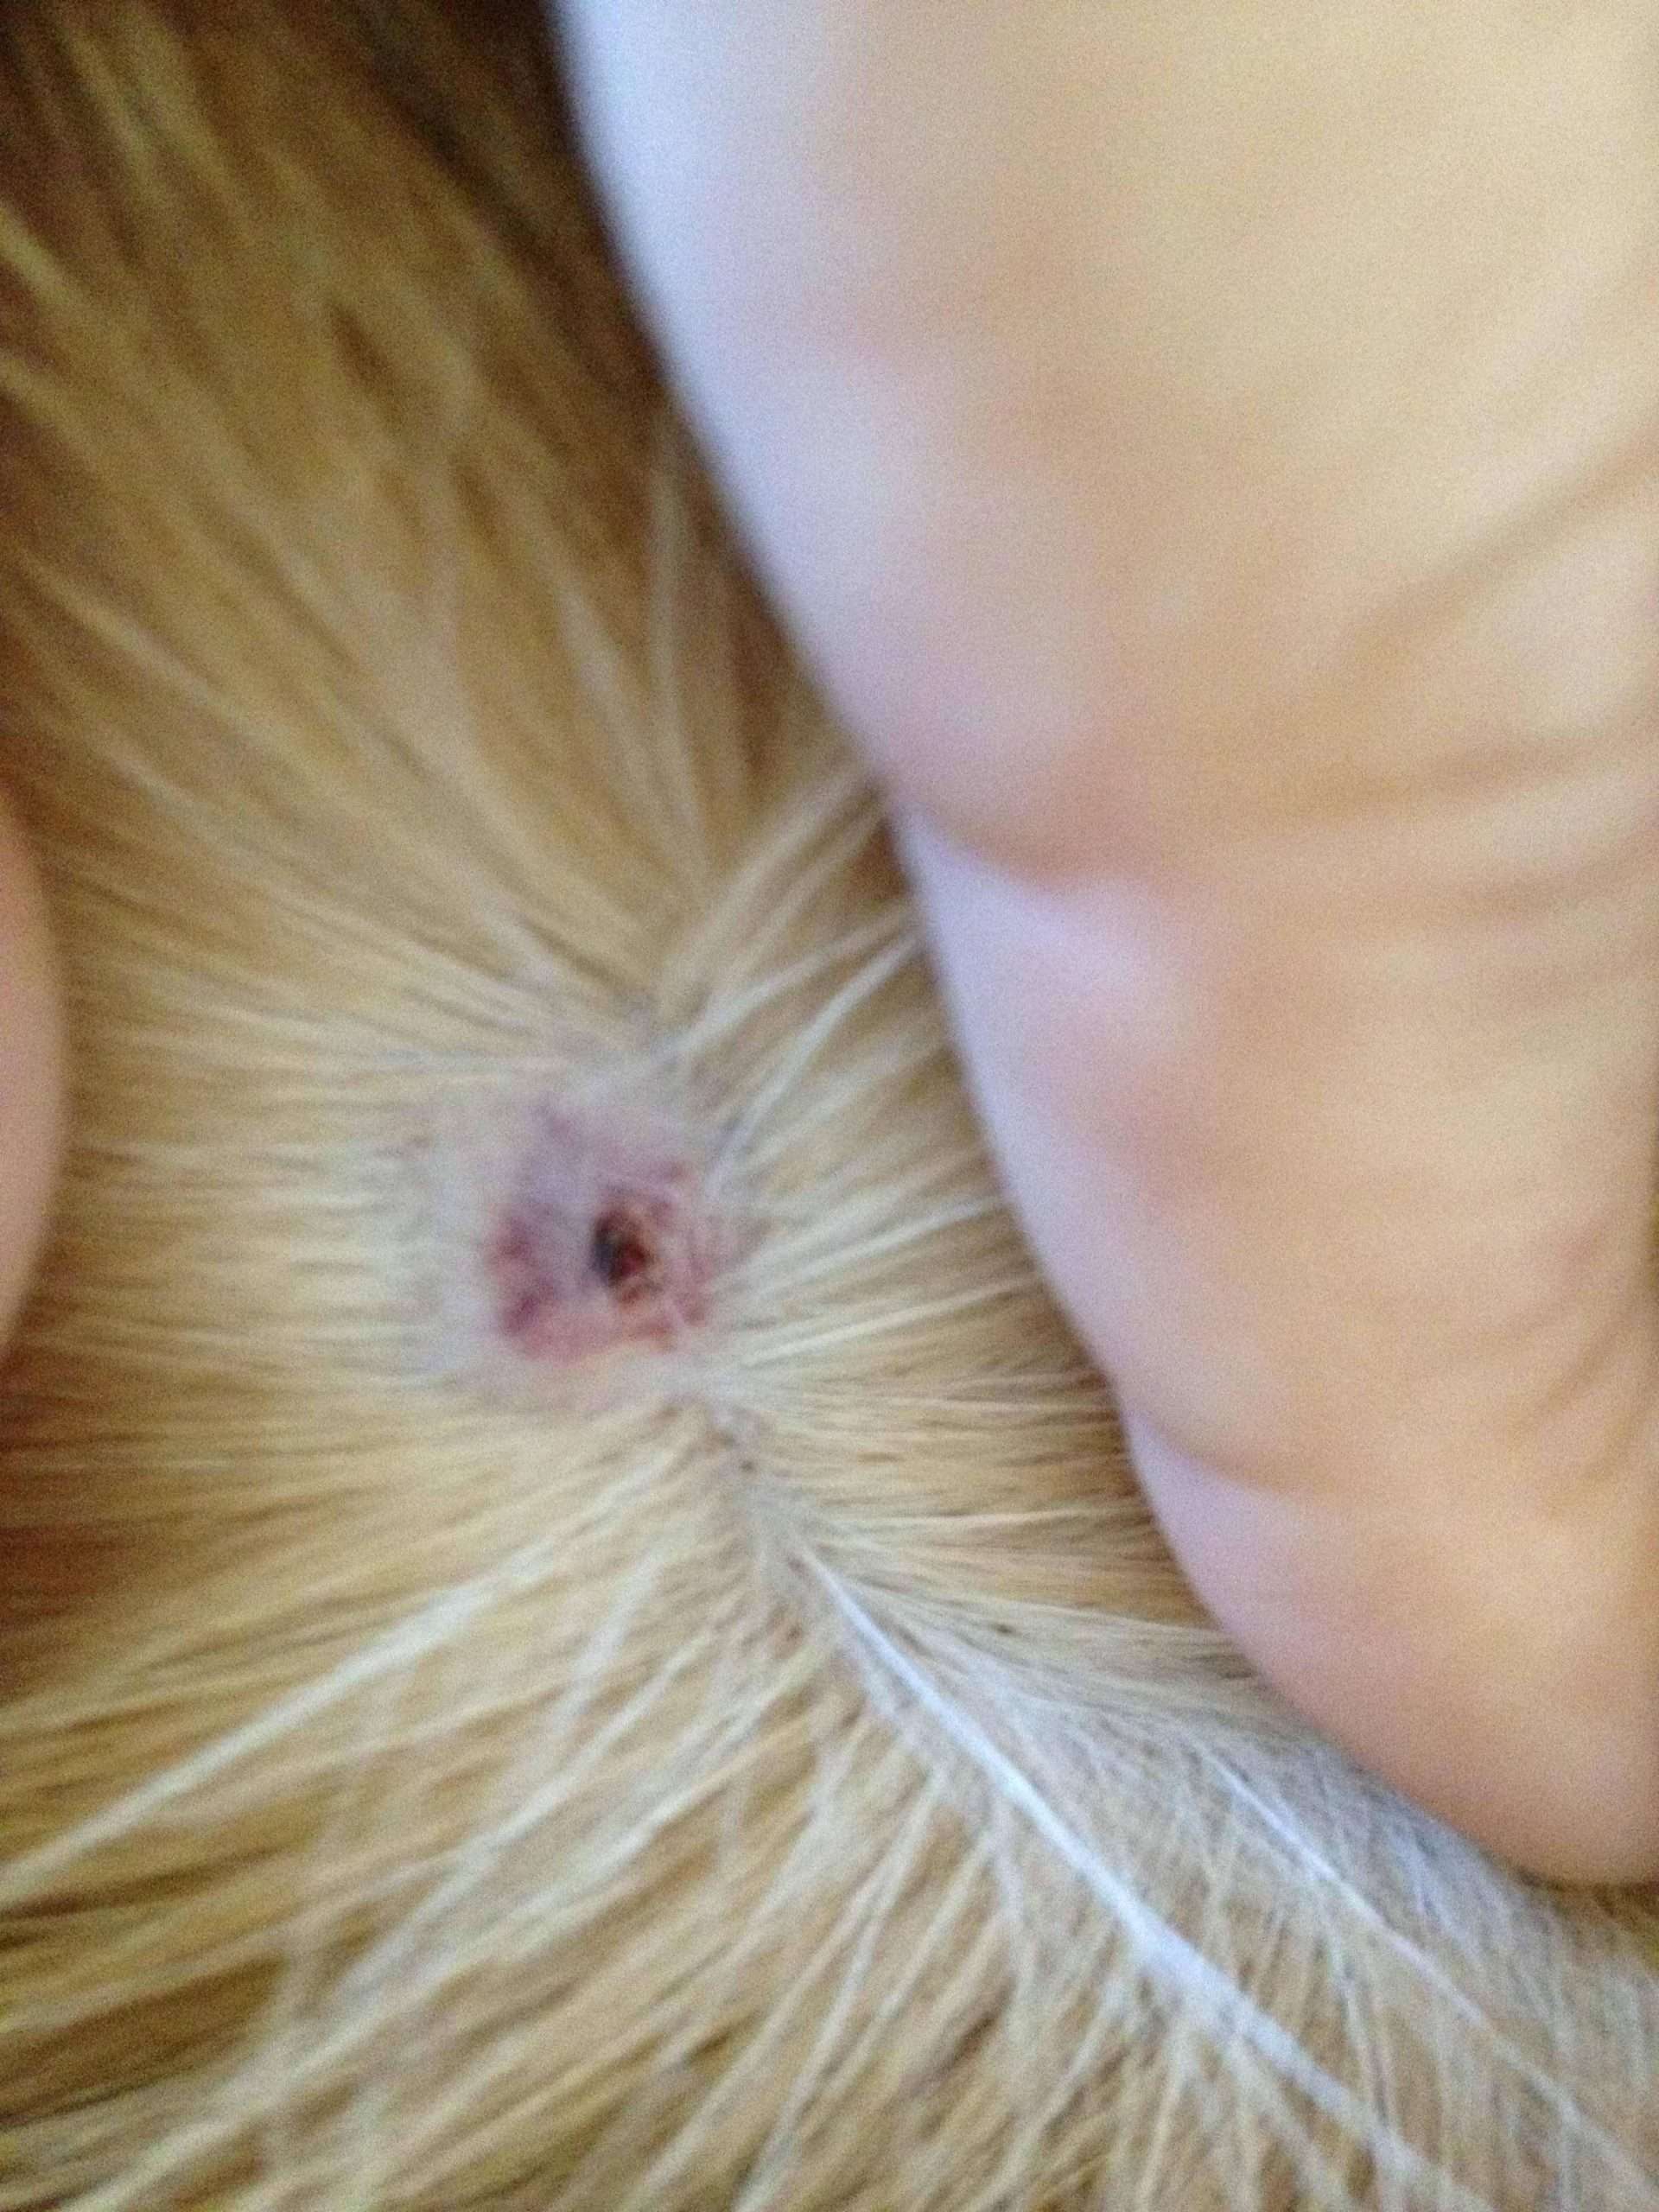 Can any vets out there help me out and tell me what this ...